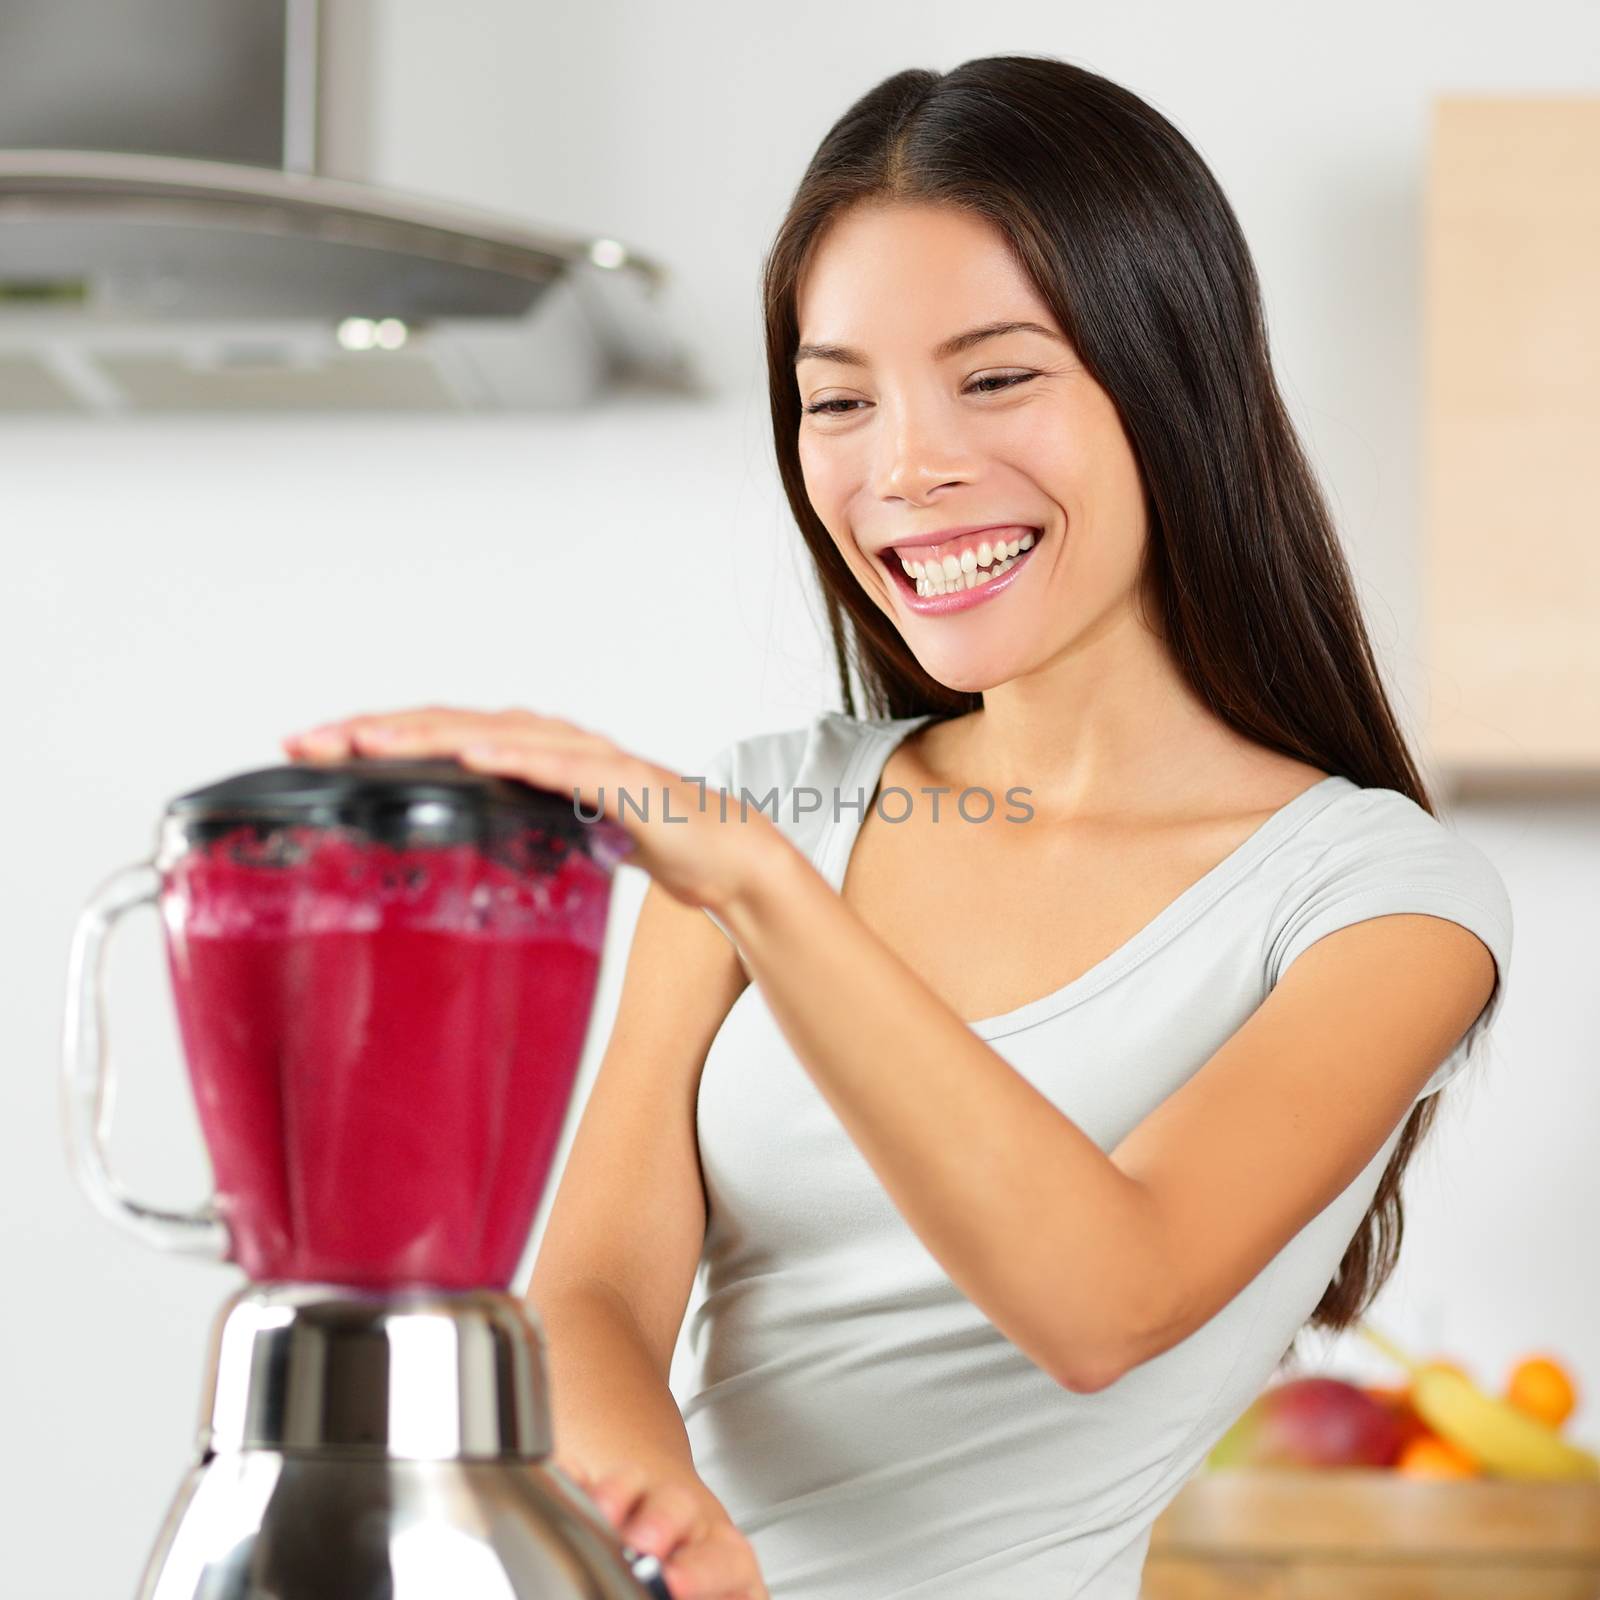 Smoothie woman blending healthy beet - fruit juice. Asian young adult using home appliance kitchen blender to make vegan organic vegetable smoothie using raw ingredients for diet.